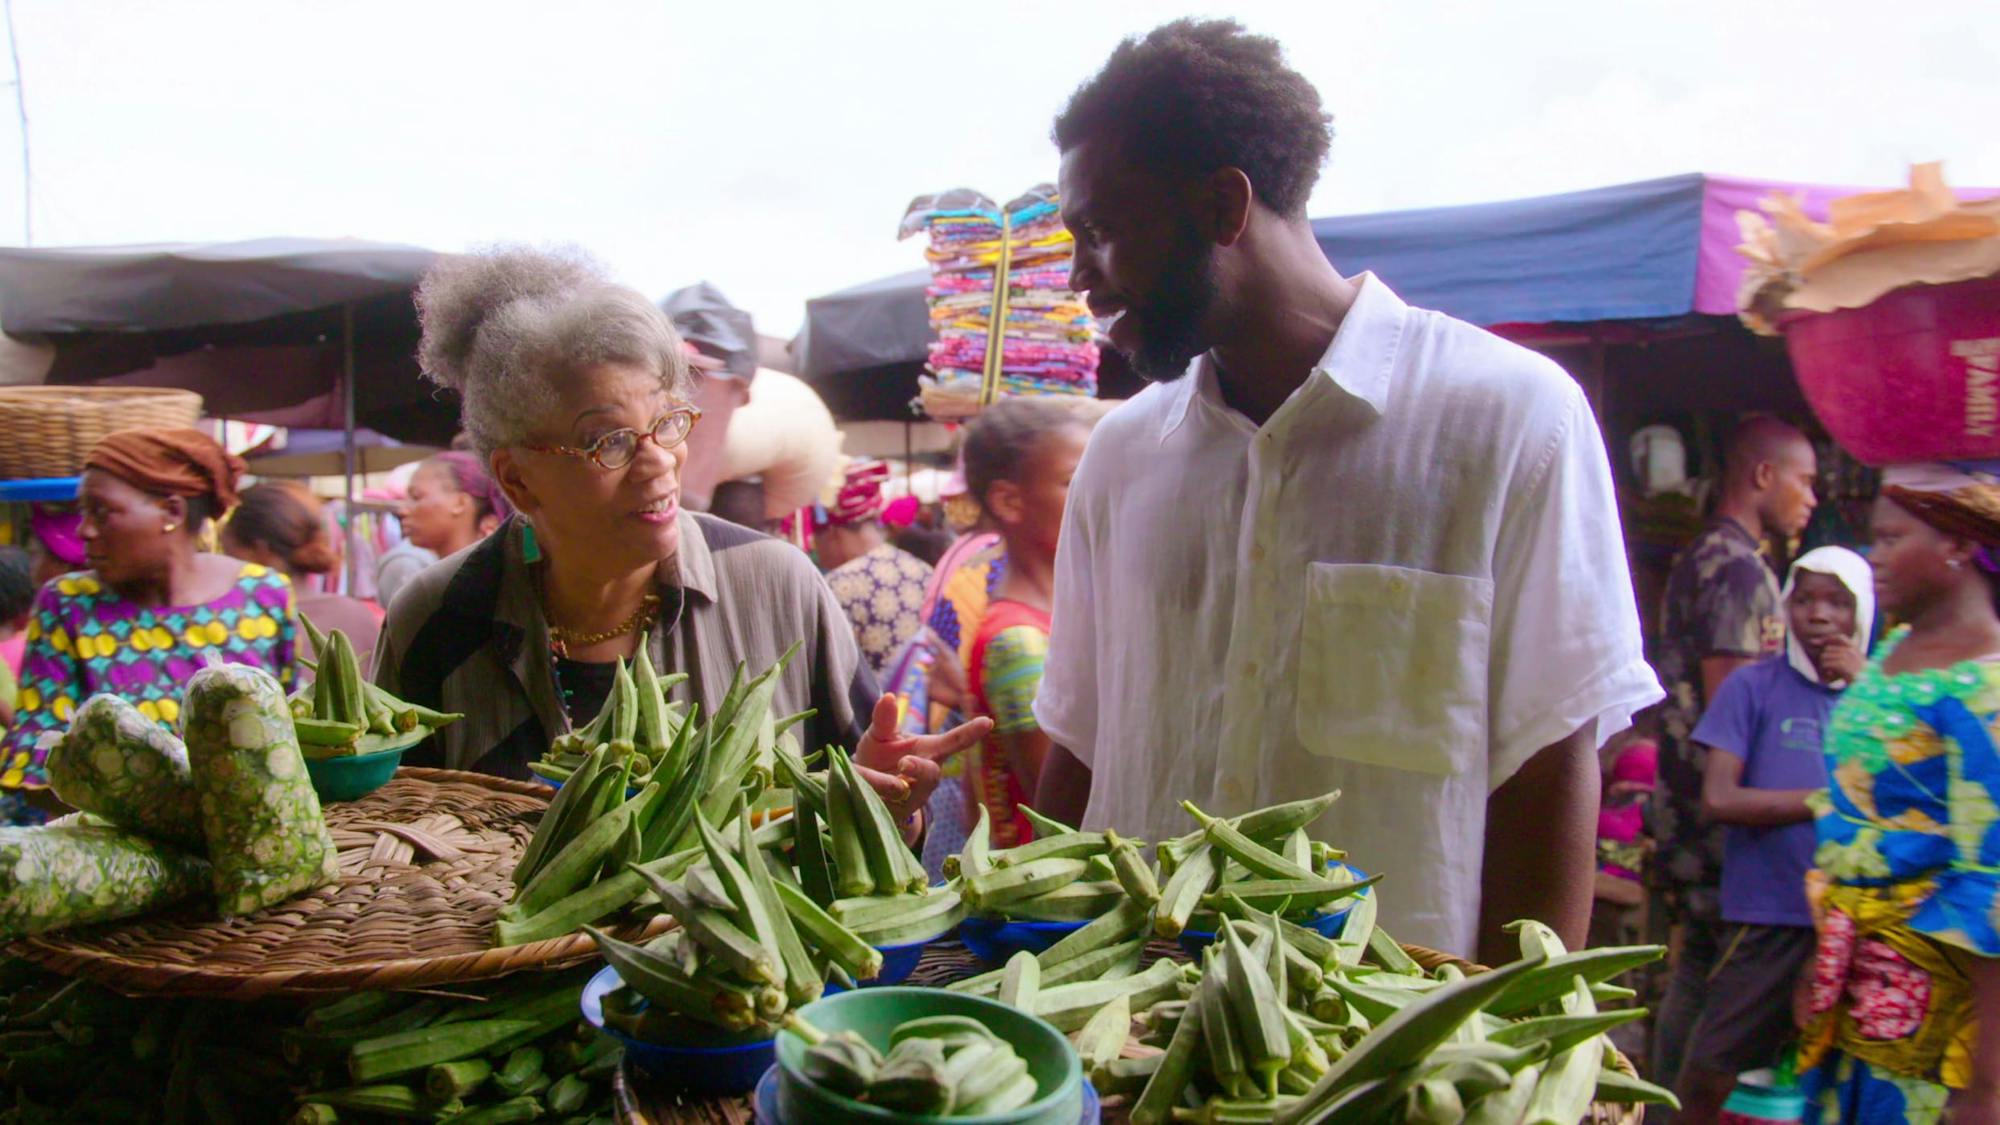 Jessica B. Harris and Stephen Satterfield shop in an outdoor market. They look at each other in conversation over a heaping pile of okra. In the background are lots of people dressed in bright colors.